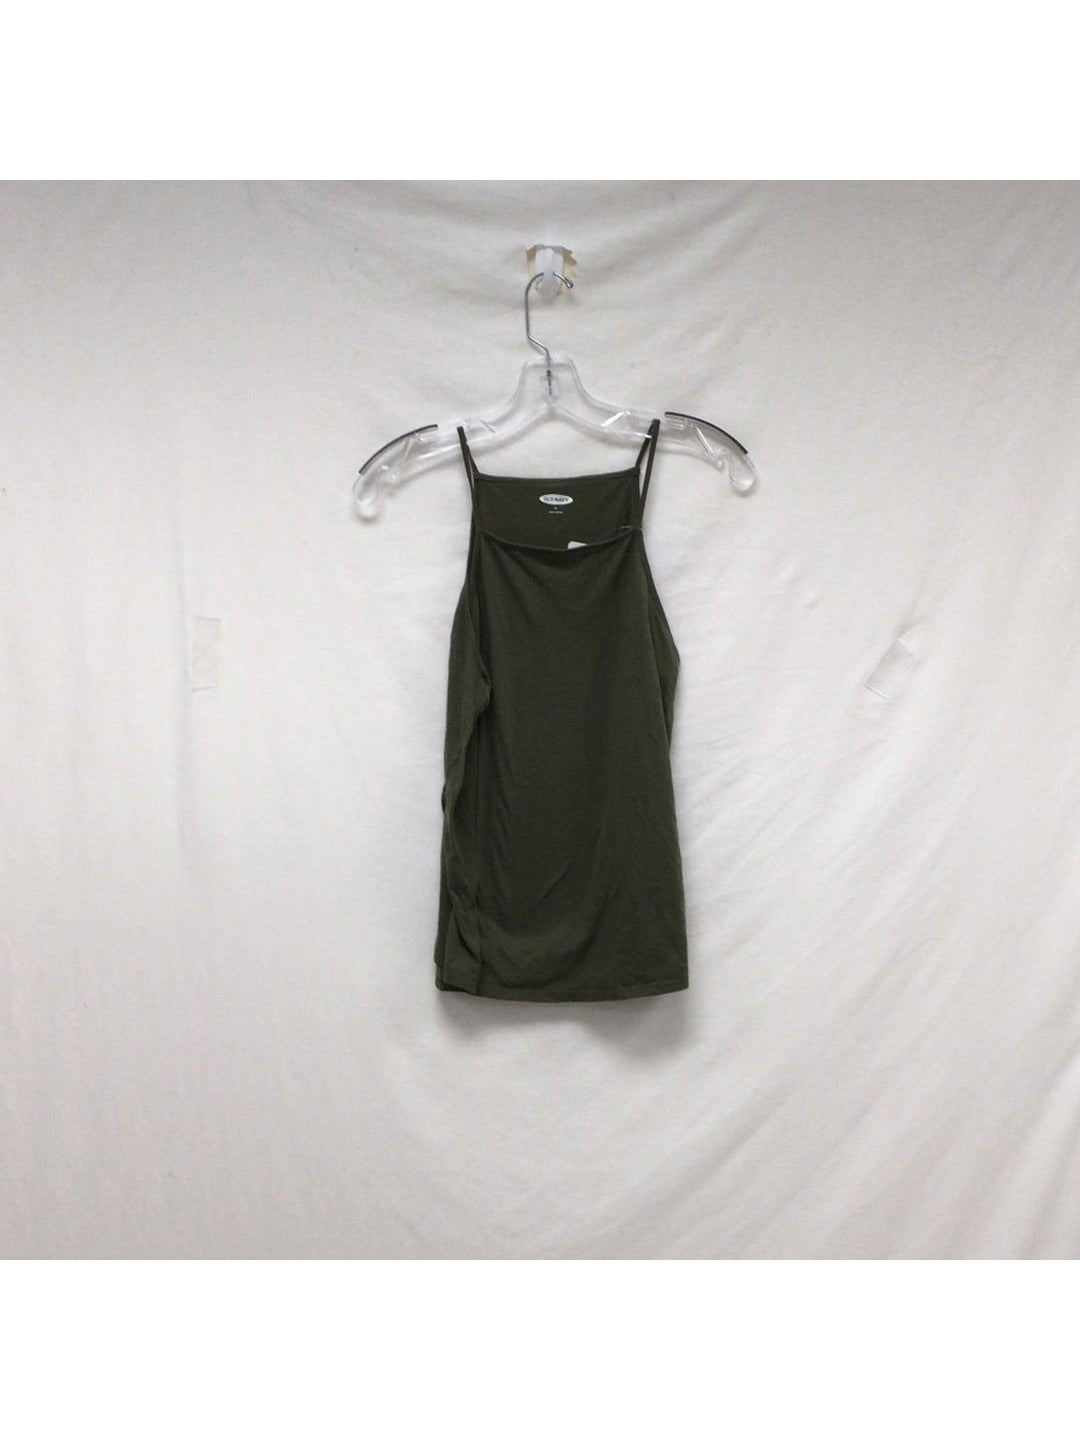 Women’s Old Navy Green Luxe Tank Top Large - The Kennedy Collective Thrift - 